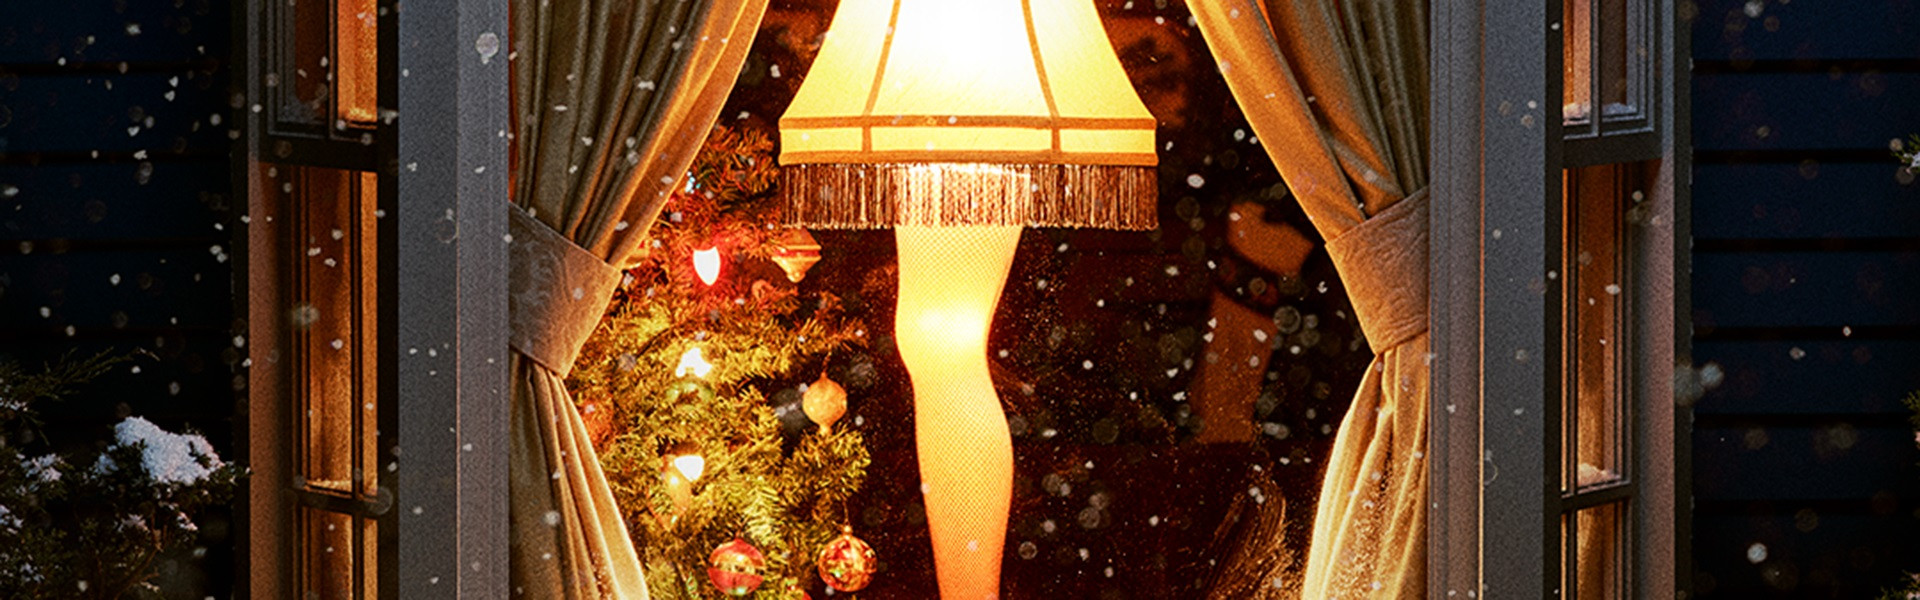 A Christmas Story Lamp
 The Pixar lamp is the greatest cinematic lamp brought to